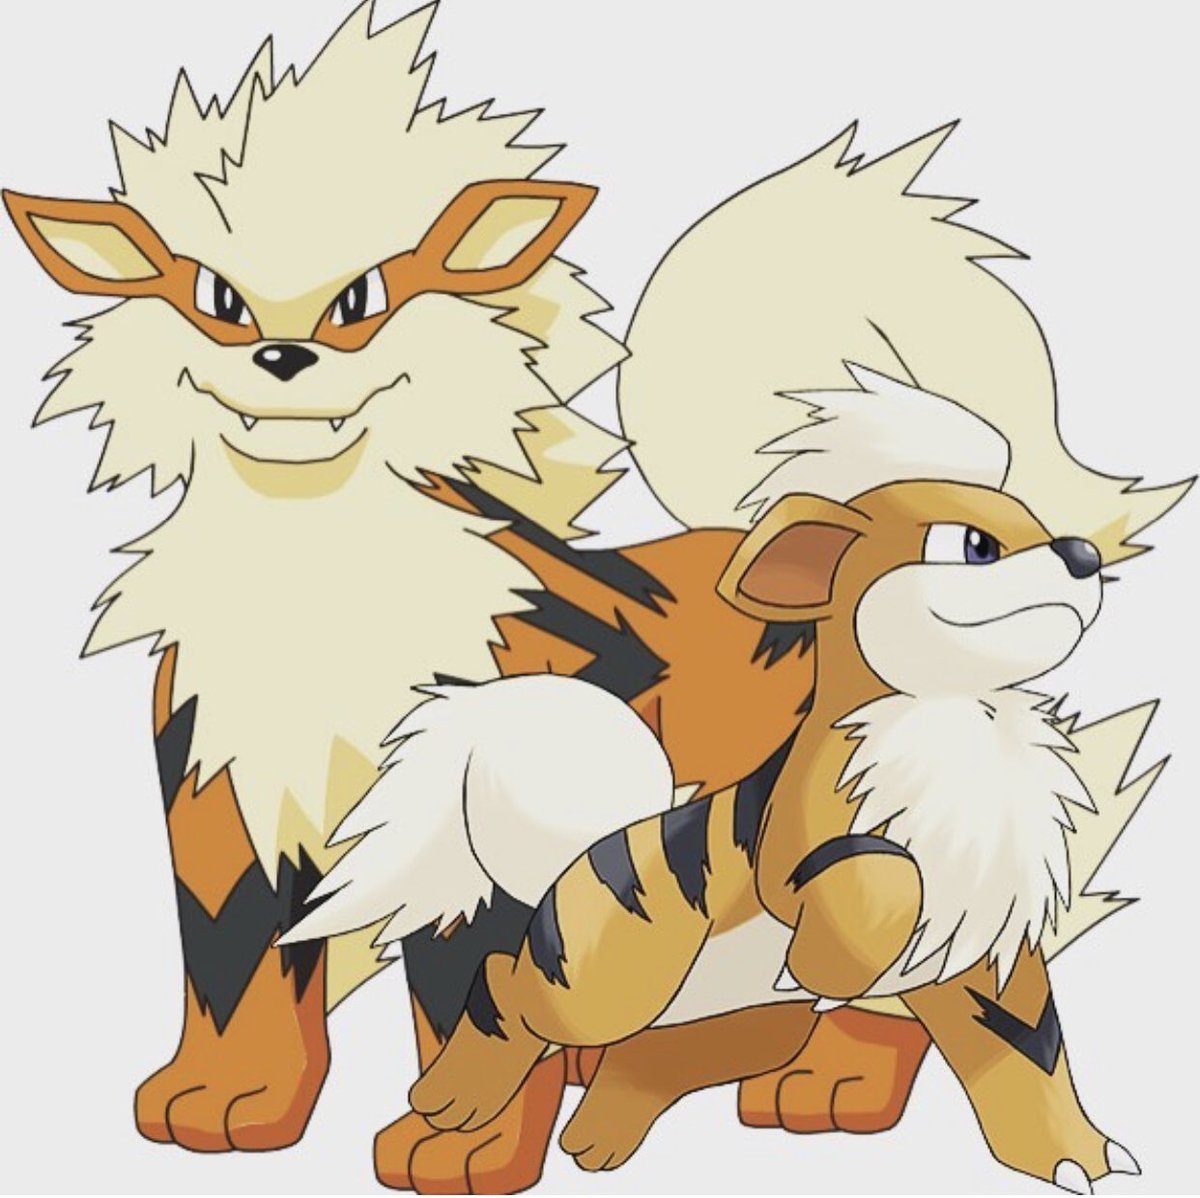 We’re looking at Fire types today, Growlithe/Arcanine have always been my f...